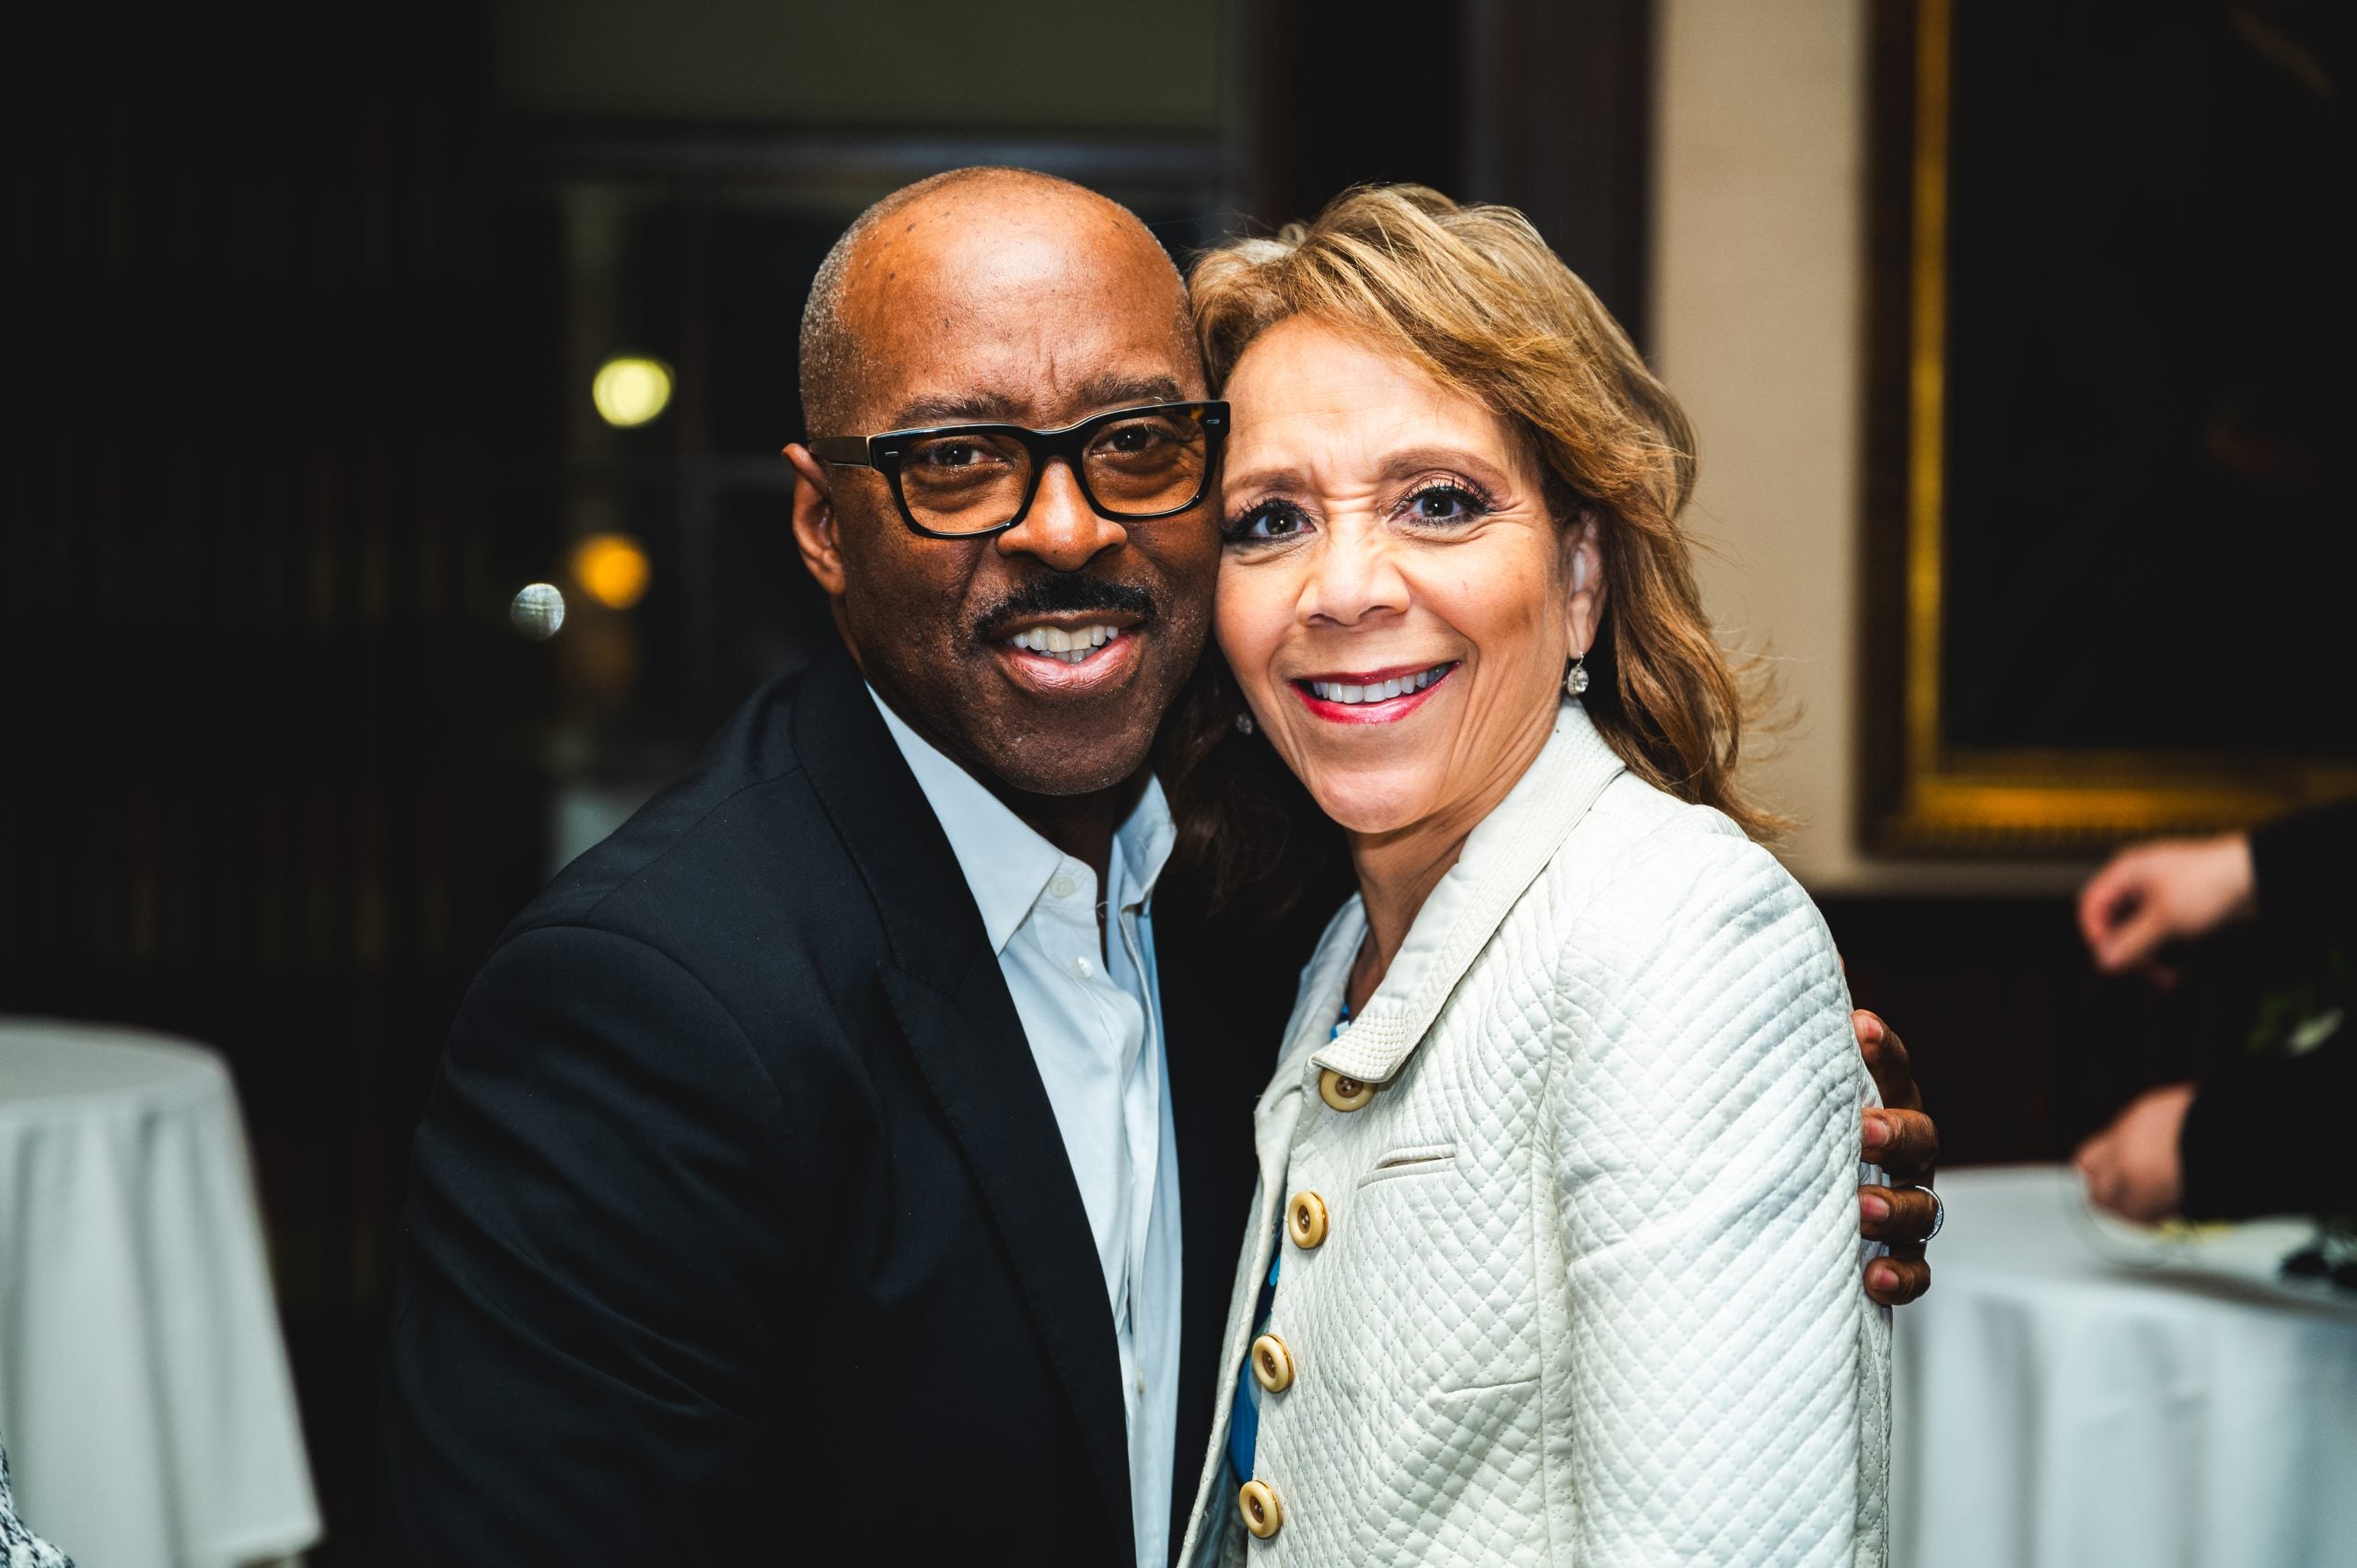 Actor Courtney B. Vance and Dr. Robin L. Smith Center Black Men's Mental Health In Their Book 'The Invisible Ache'